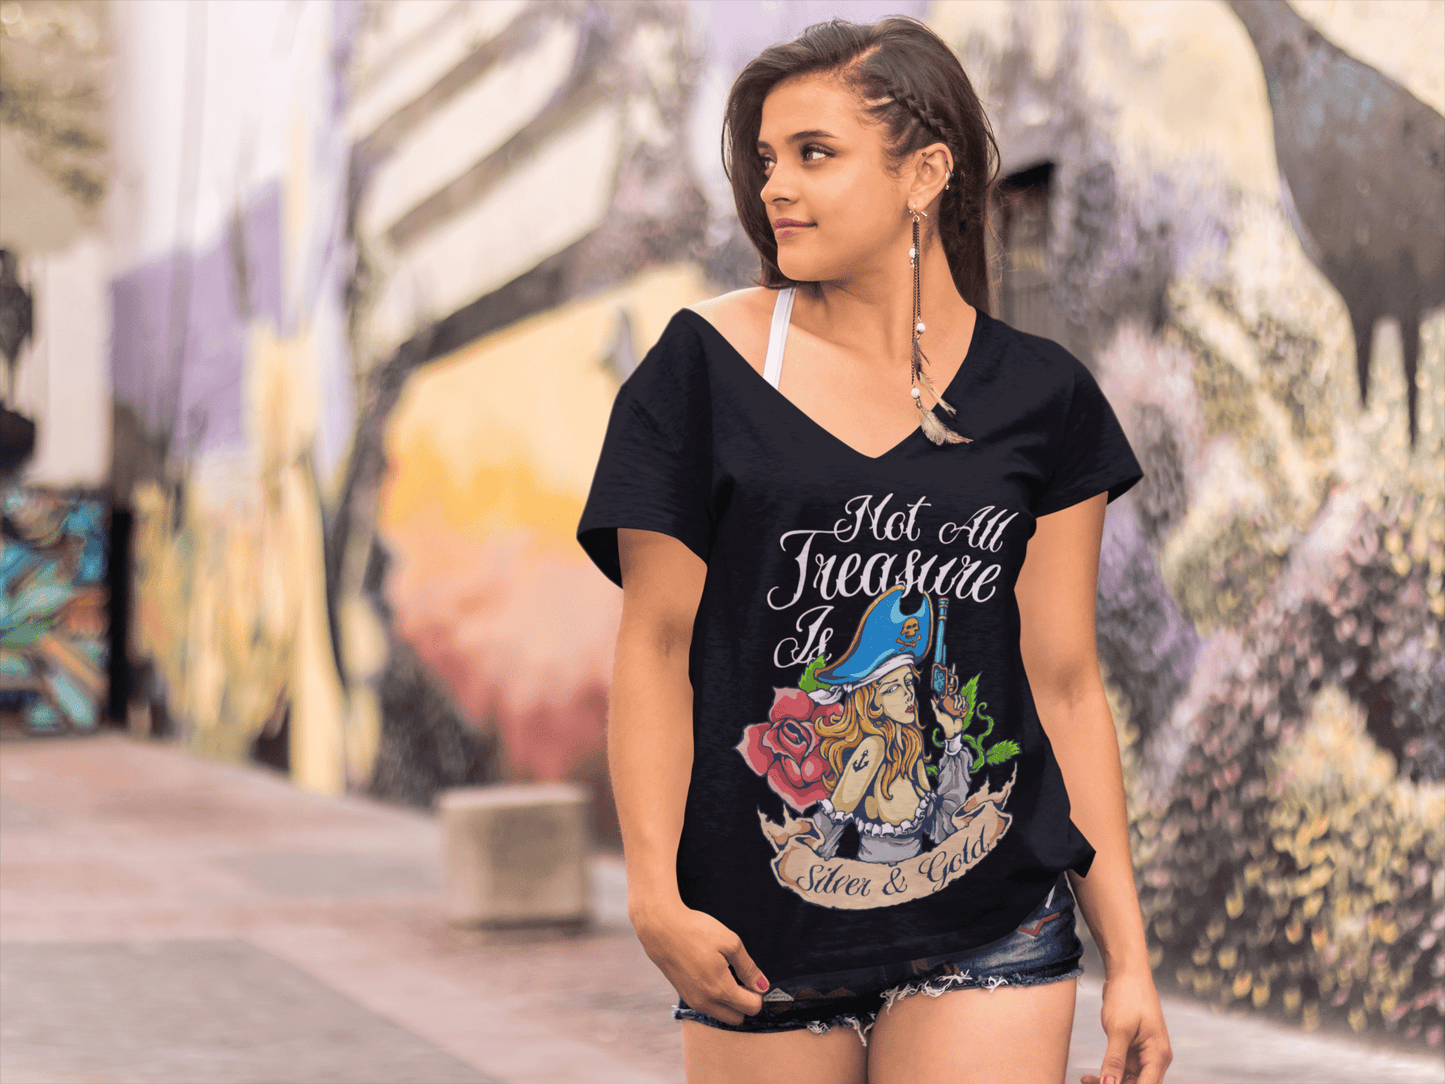 ULTRABASIC Women's V Neck T-Shirt Not All Treasure Is Silver And Gold - Pirate Girl